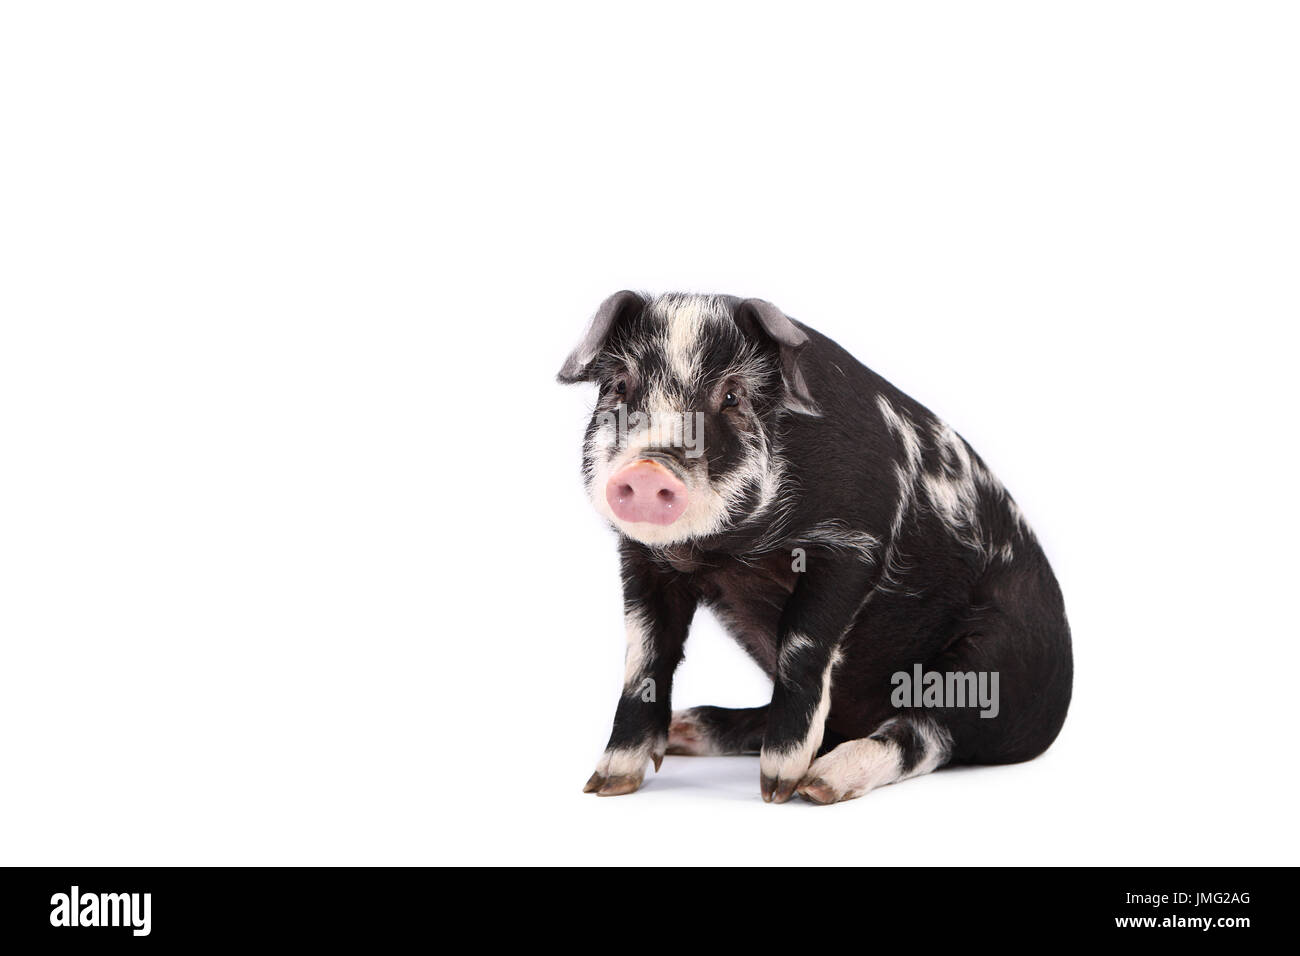 Turopolje Pig. Piglet sitting. Studio picture against a white background. Germany Stock Photo